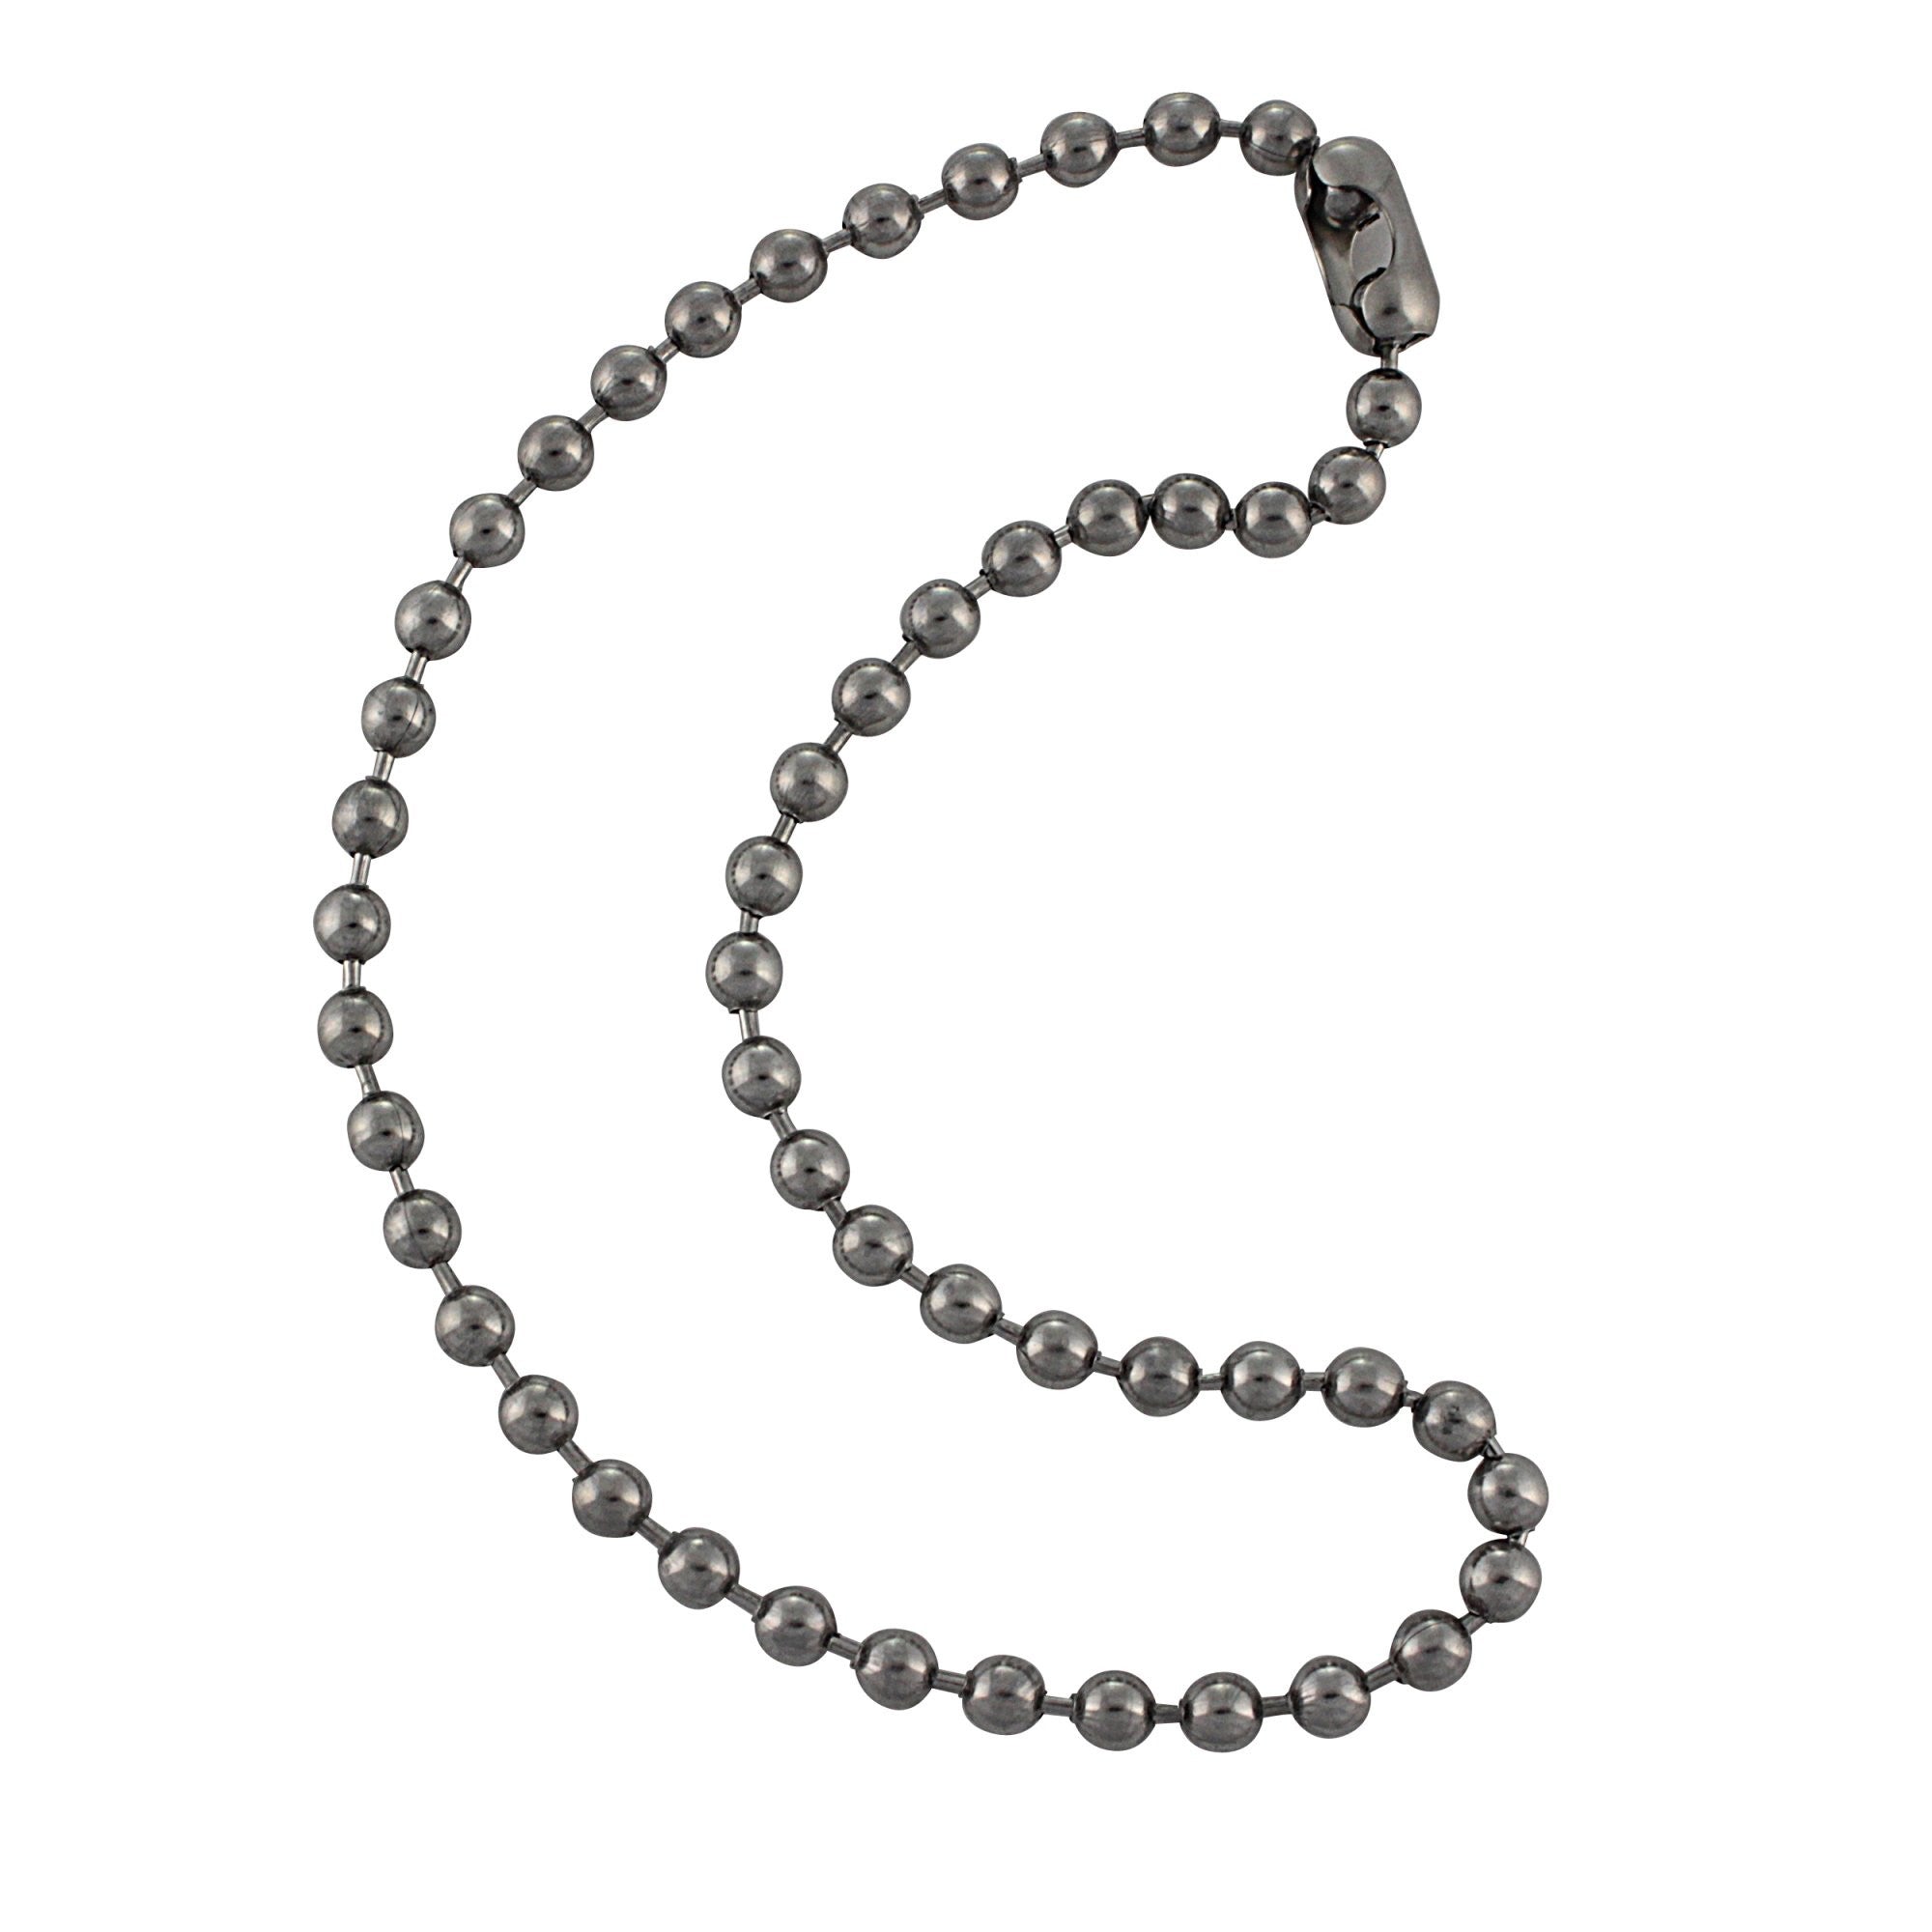 33ft Stainless Steel Ball Chain 3mm Bead Dog Tag Chain Beaded Necklace  Chains for Jewelry Making Bracelet Military Crafts, Silver Metal Pull Chain  Small Ball Bead Chain Roll w/20 Connectors - Walmart.com